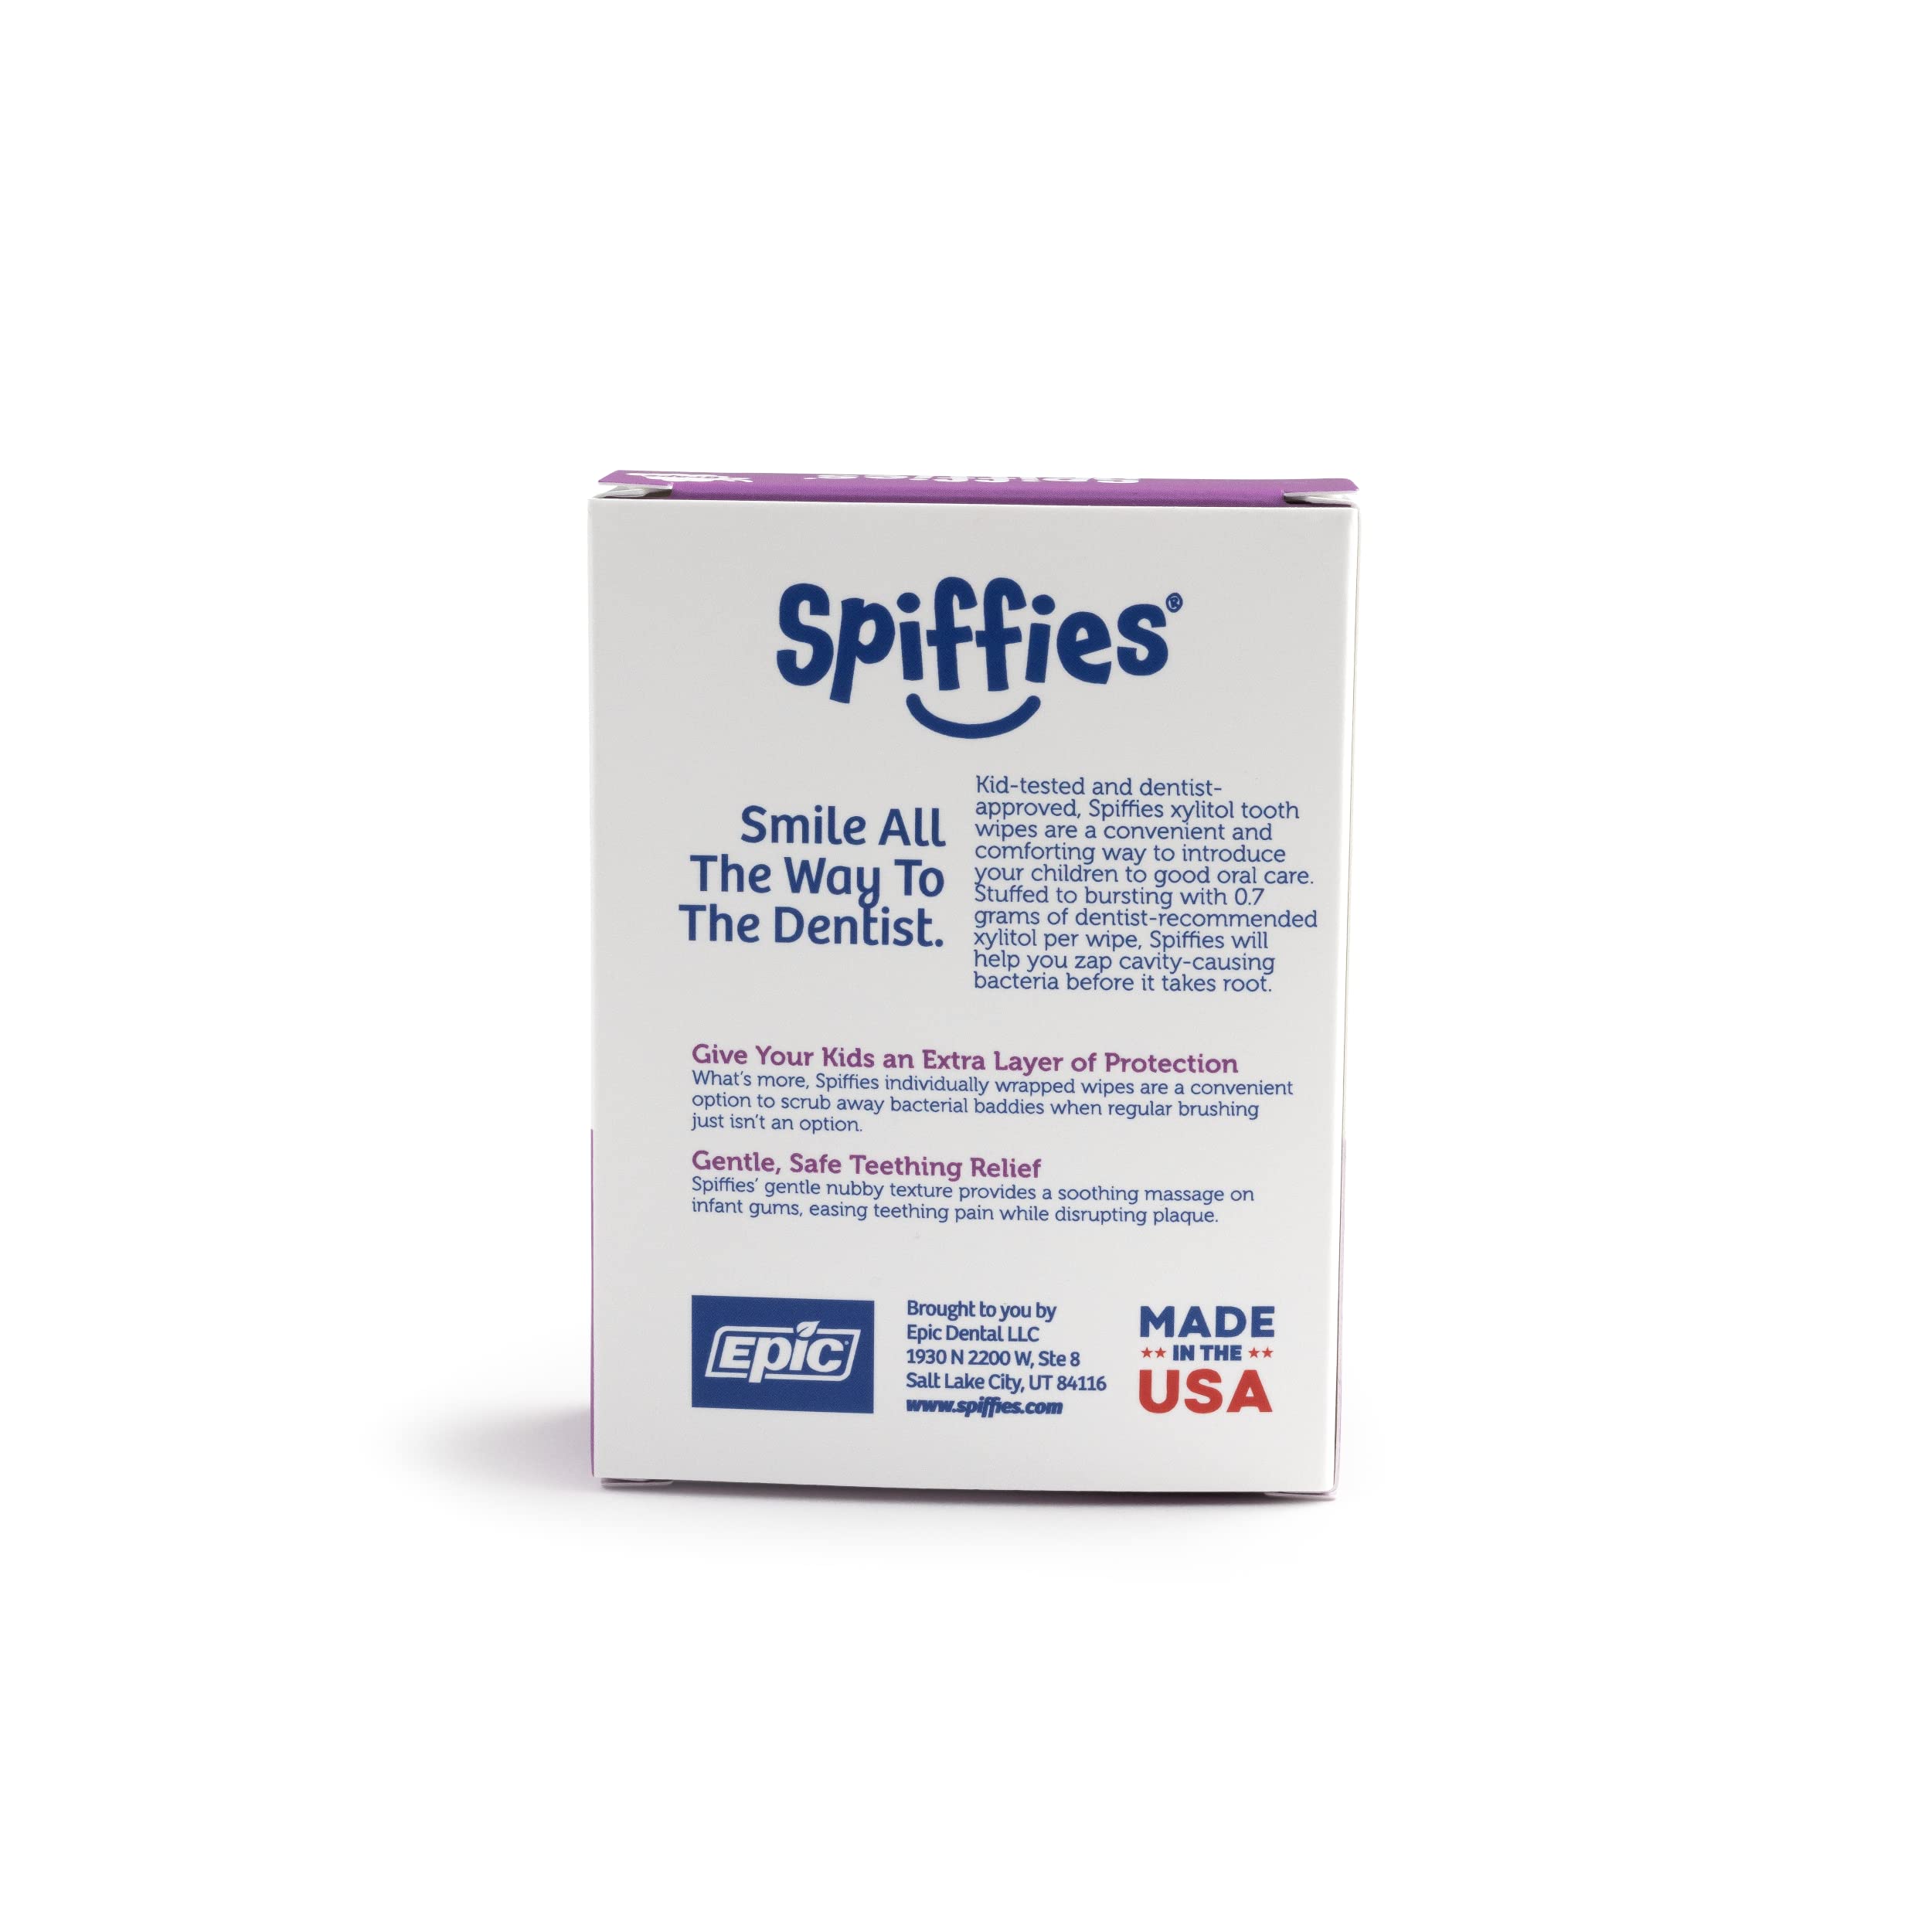 Spiffies Baby Oral Care Tooth Wipes - Gum & Teeth Wipe Tissues for Teething Relief & Cleaning Infant & Toddler Teeth - Baby Tooth Wipes w/Xylitol for Ages 0-12 Months & Up (Grape, 20 Count, 3 Pack)